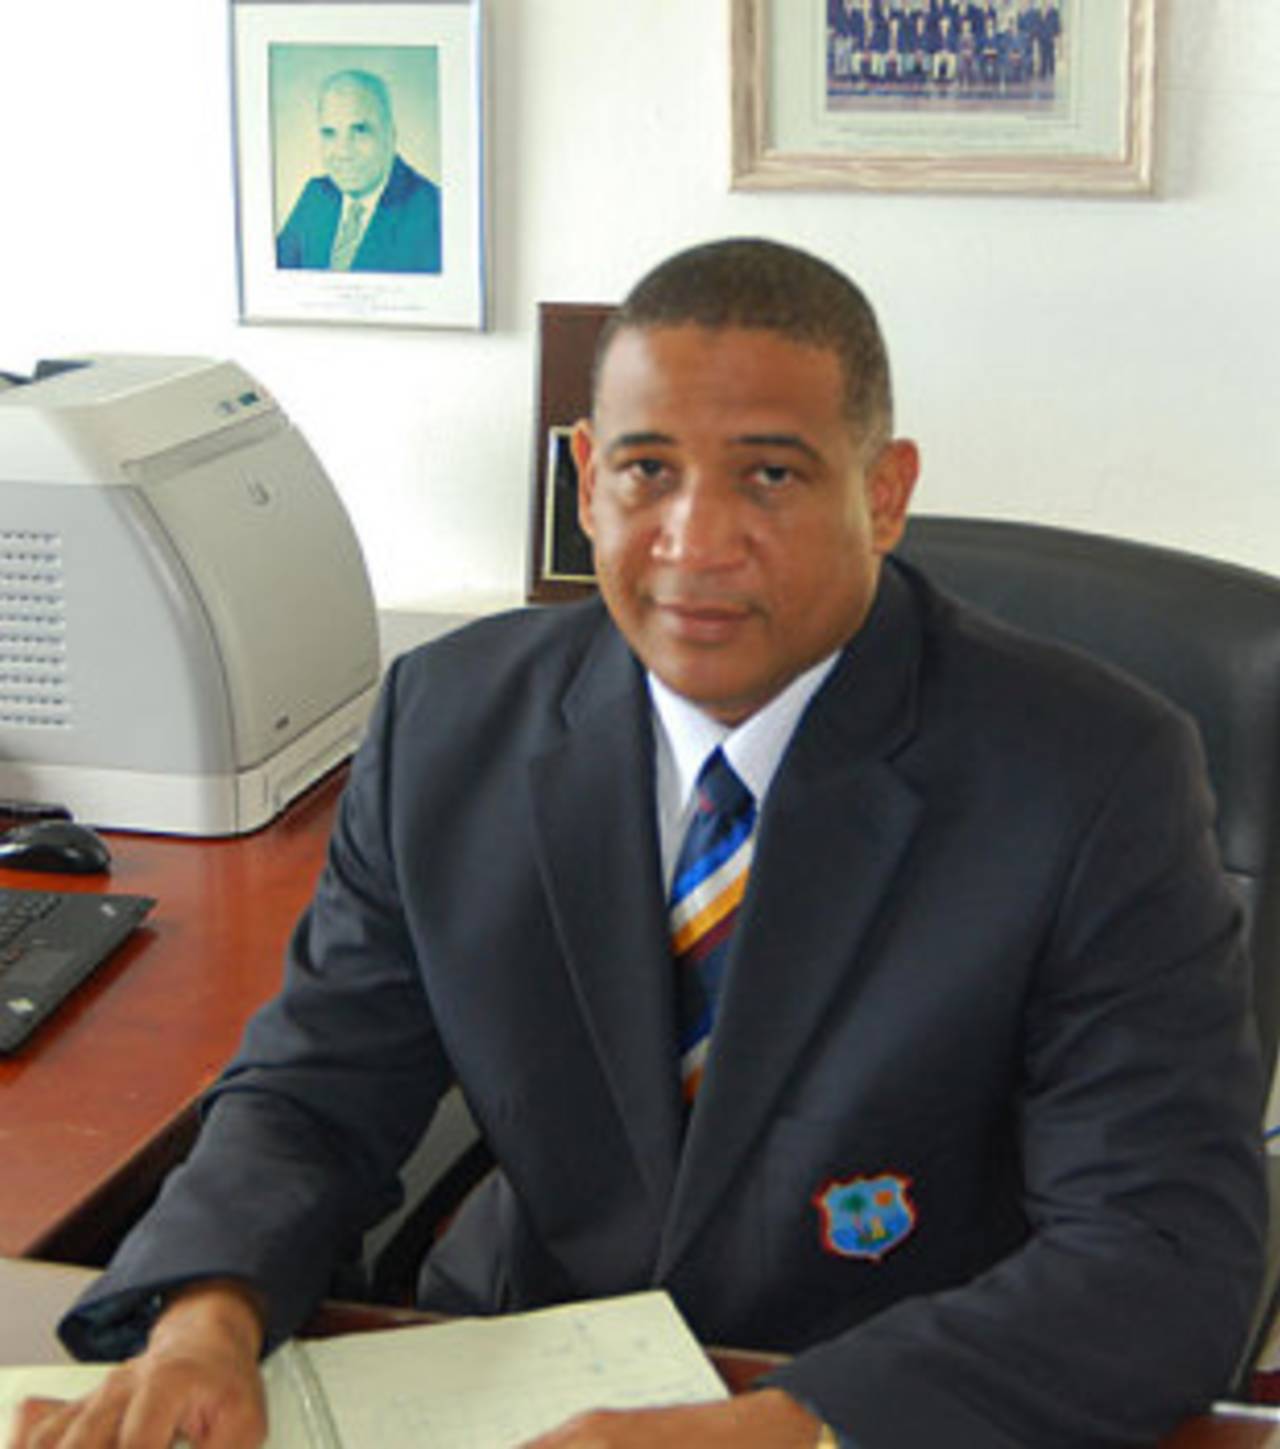 The WICB CEO Ernest Hilaire has reacted strongly to WIPA president Dinanath Ramnarine's statement&nbsp;&nbsp;&bull;&nbsp;&nbsp;West Indies Cricket Board